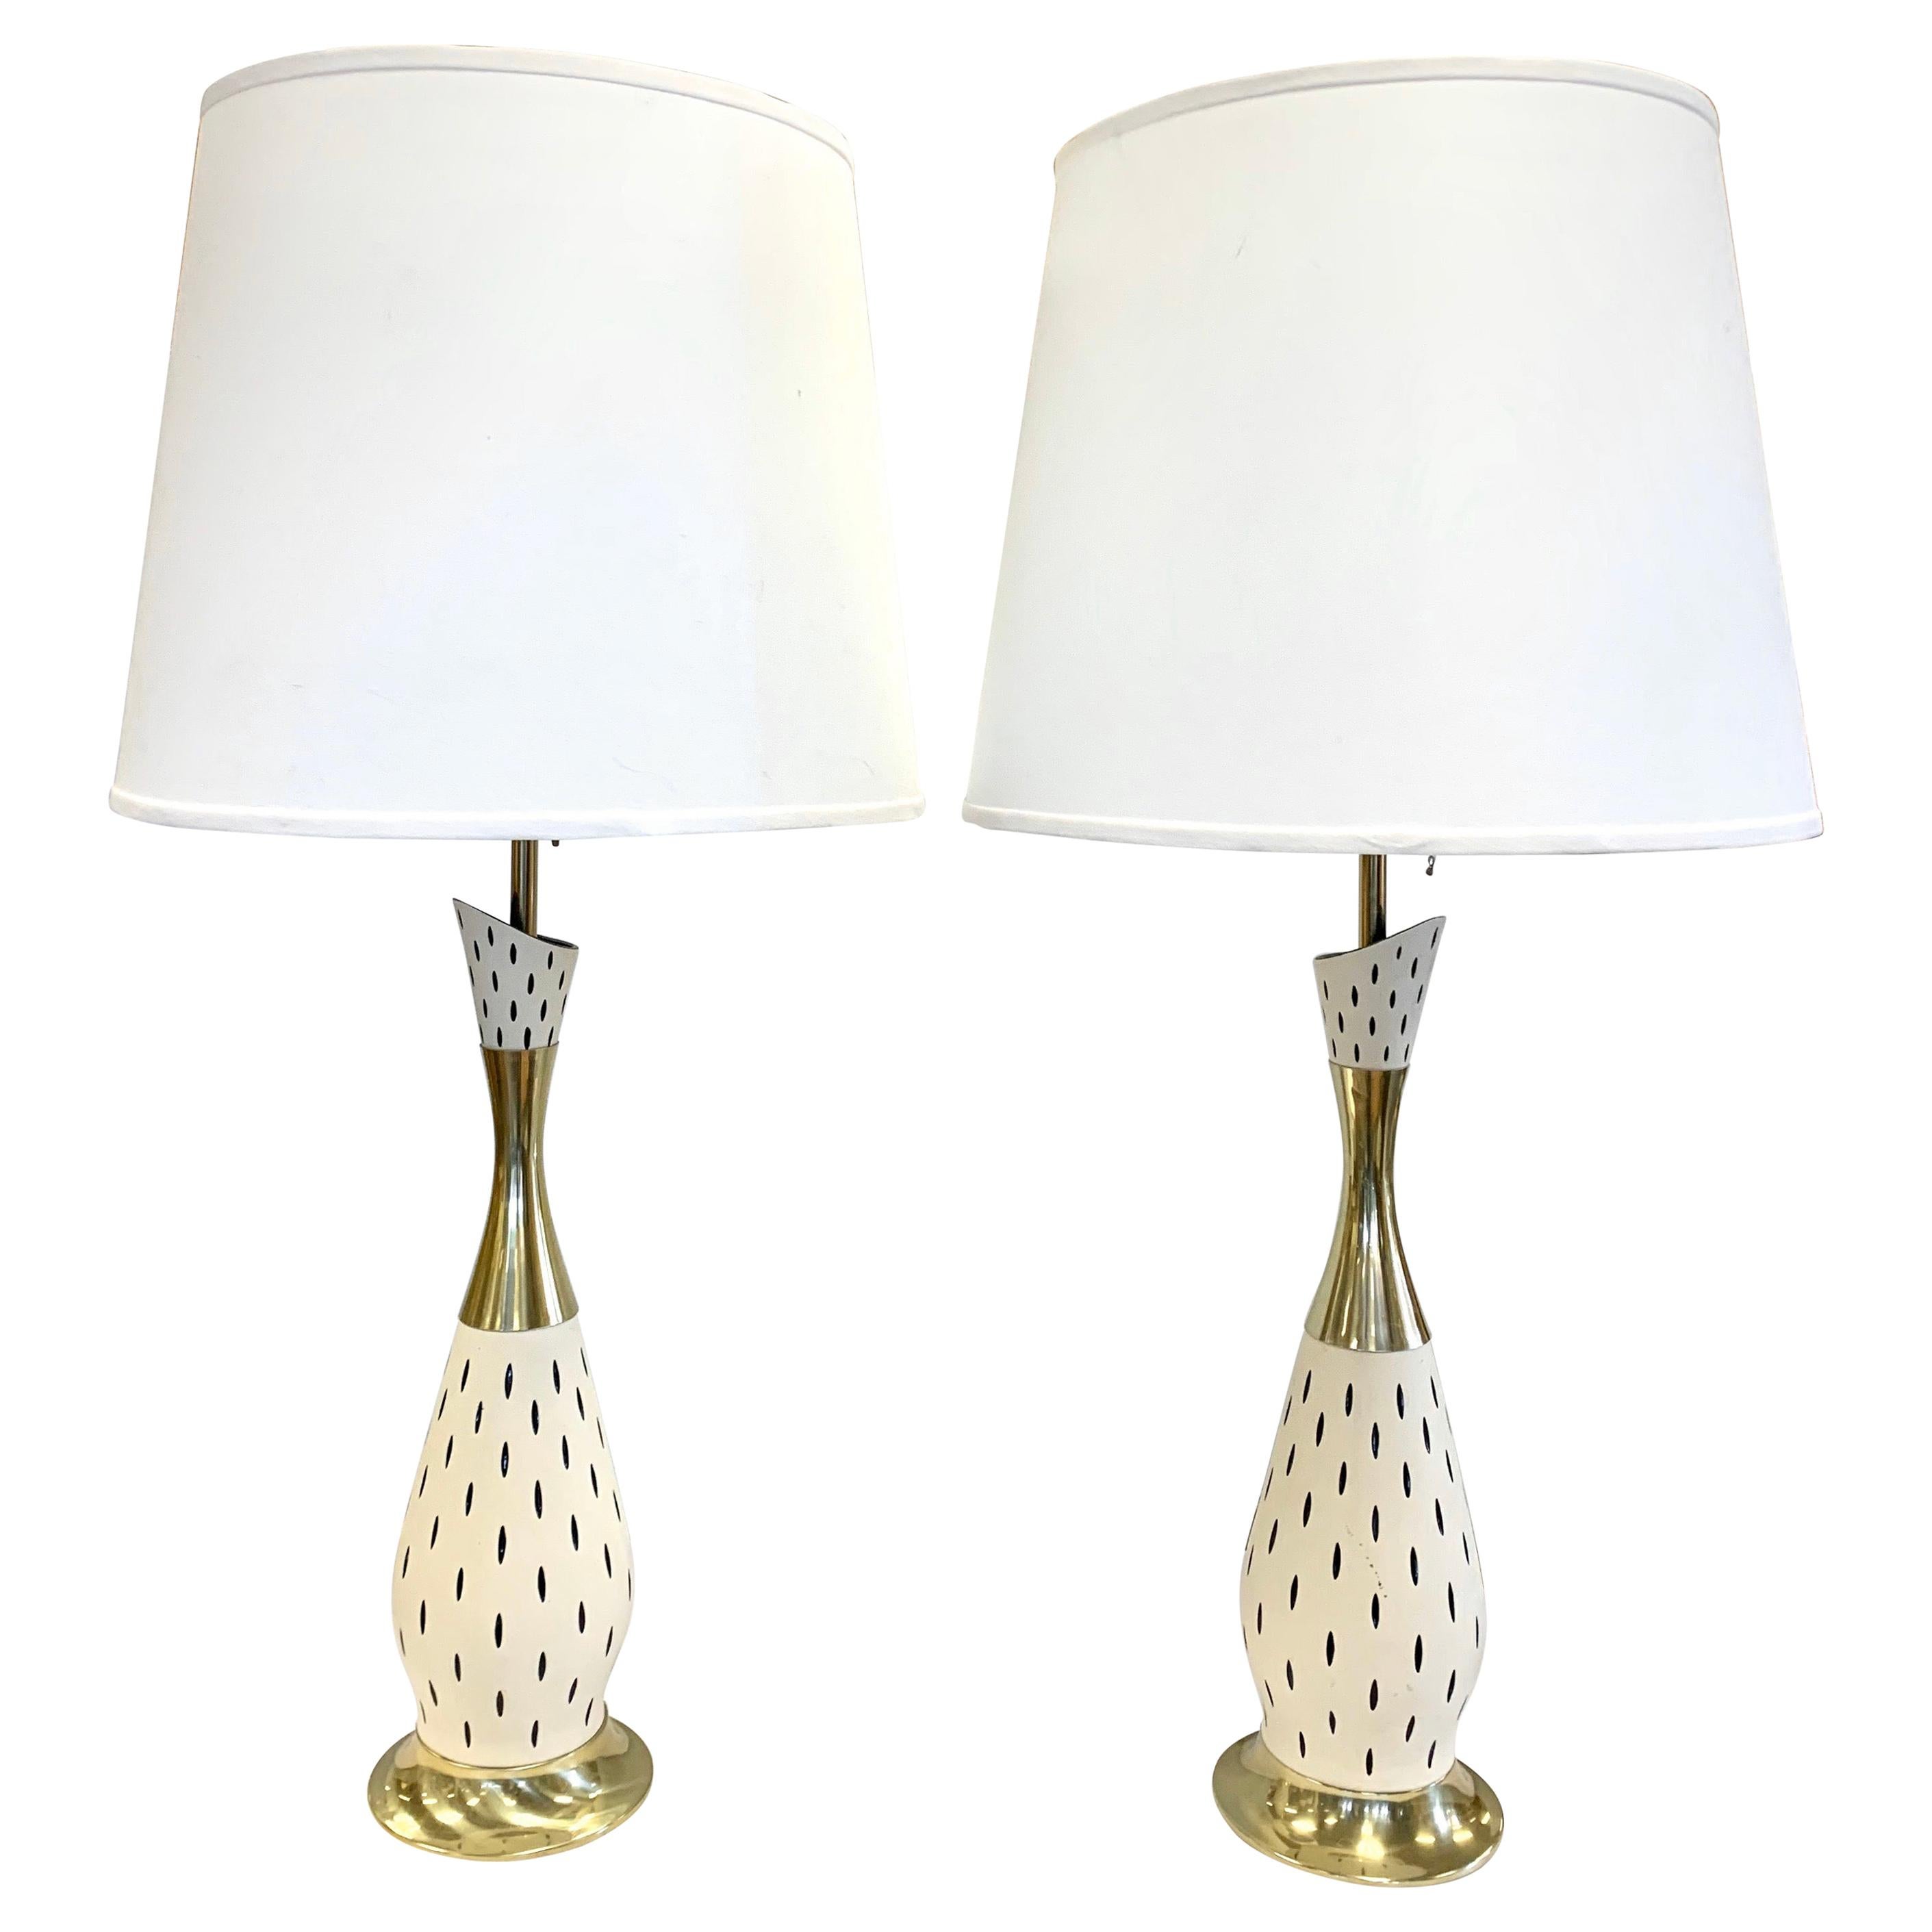 Pair of Mid-Century Modern Tall Sculptural Italian Table Lamps For Sale